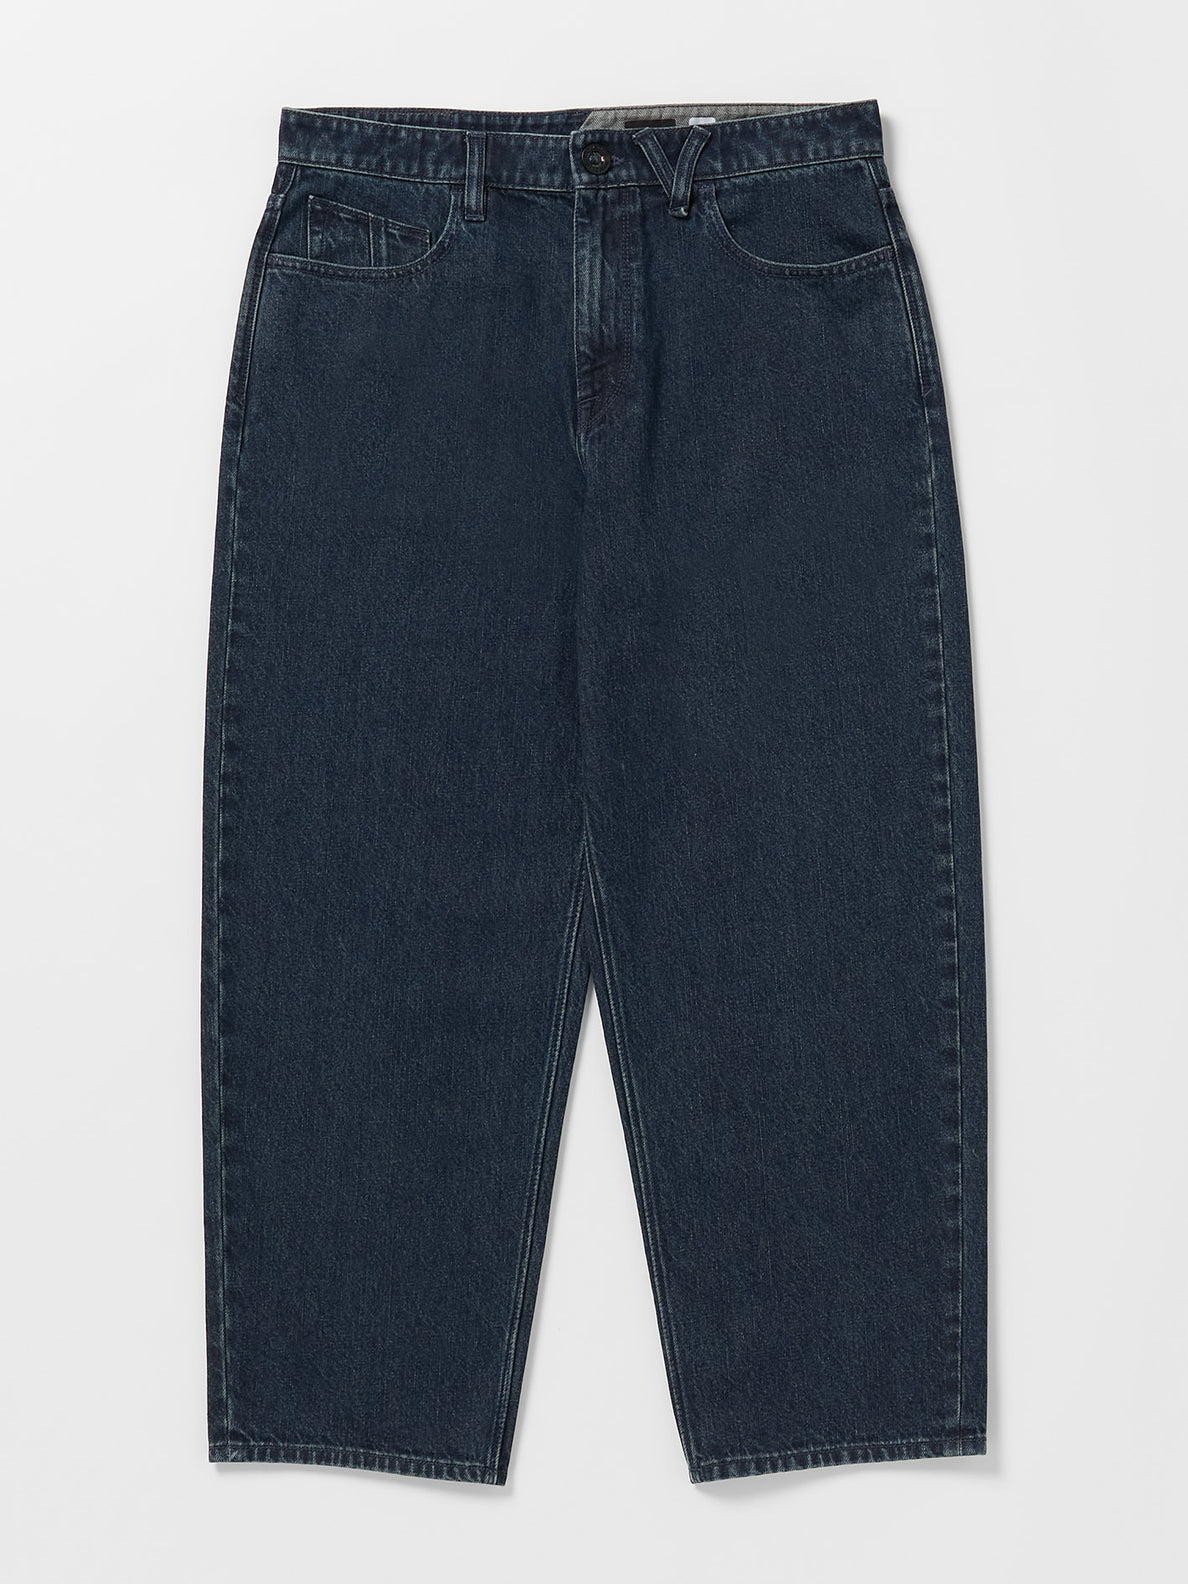 Billow Tapered Jeans - DEEP WATER